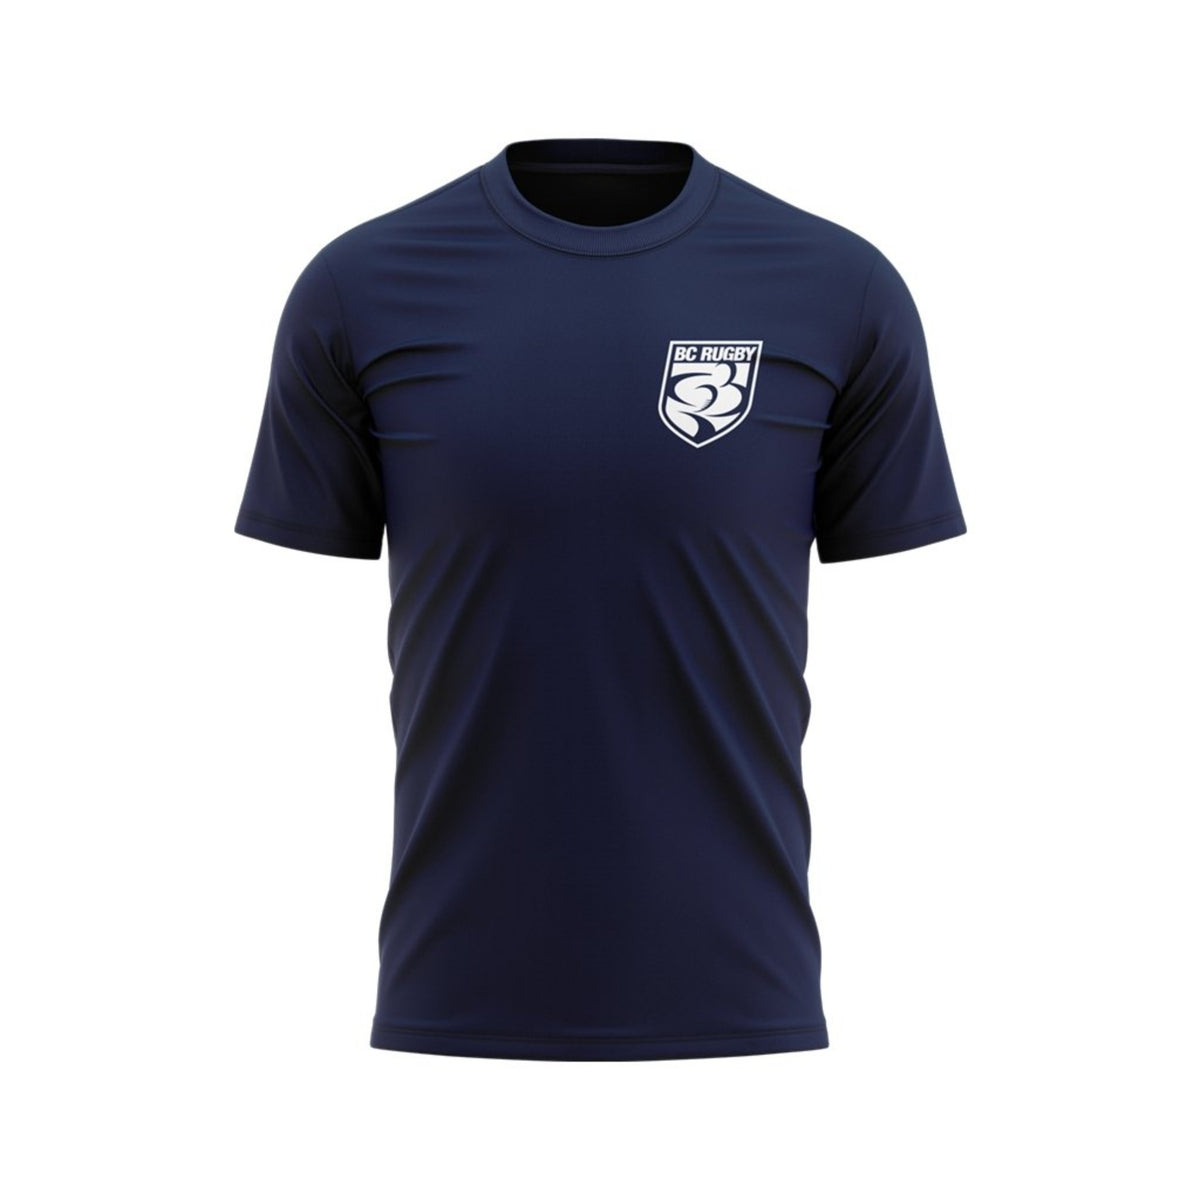 BC Rugby 2022 Shield Tee - www.therugbyshop.com www.therugbyshop.com MEN&#39;S / NAVY / S XIX Brands TEES BC Rugby 2022 Shield Tee